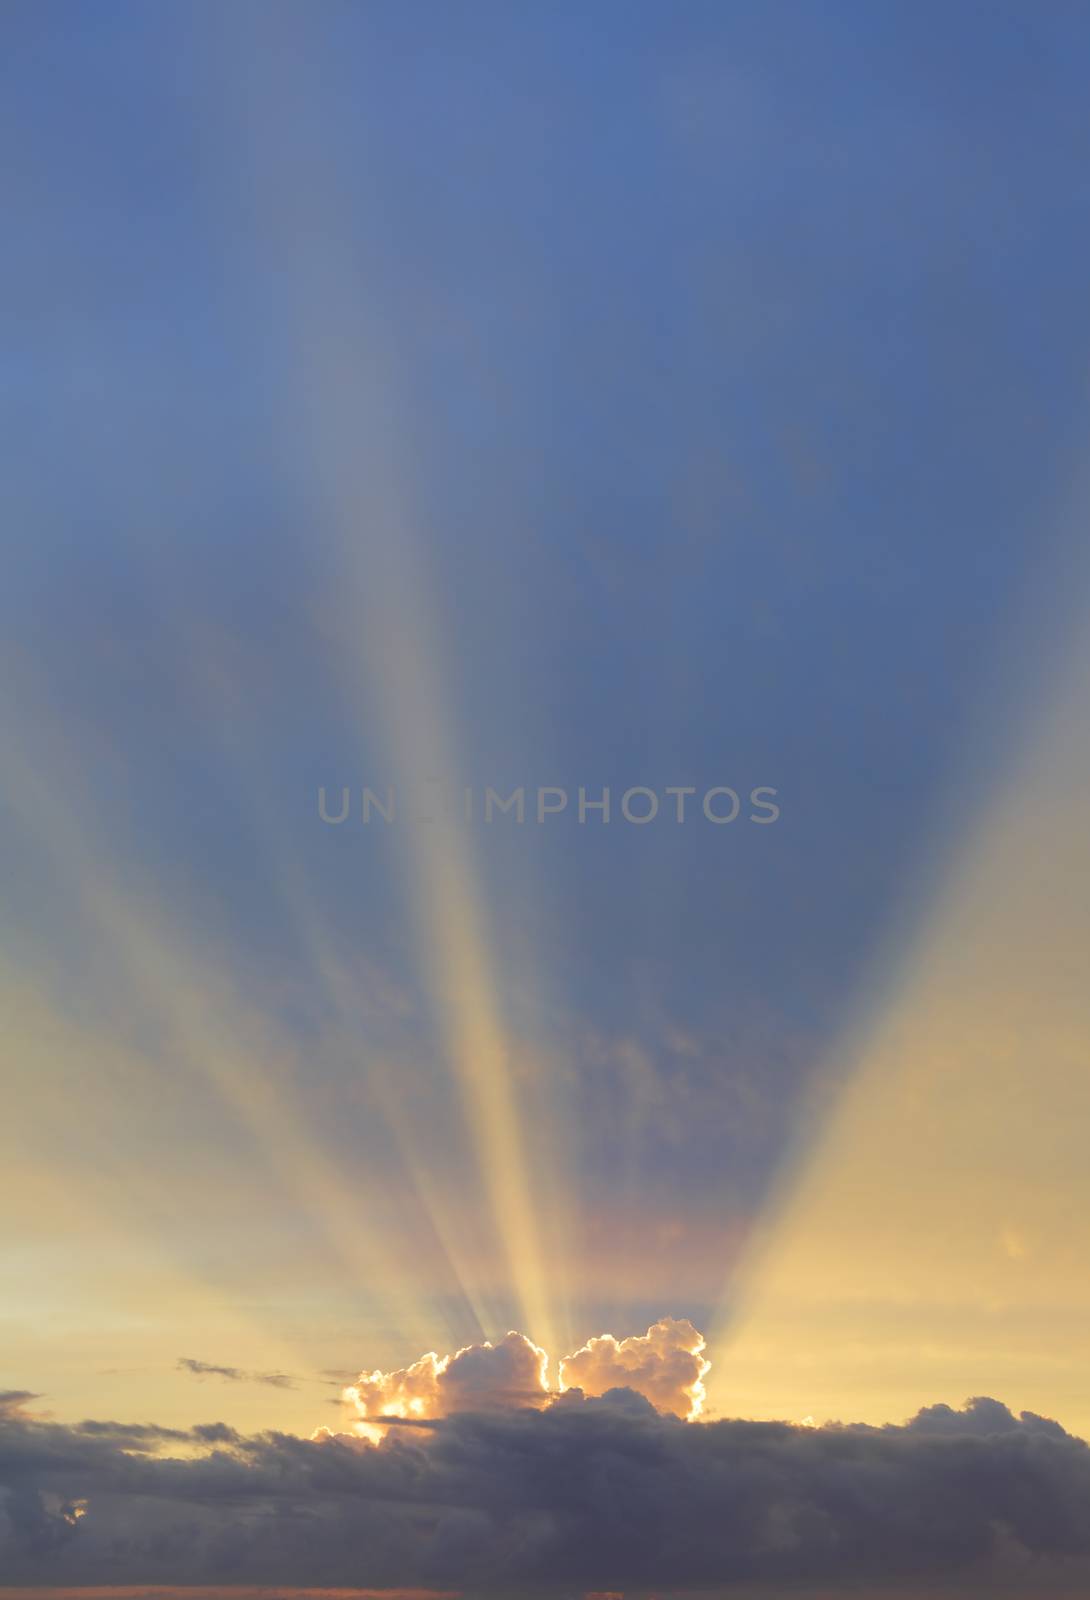 Vertical sky with sun rays bursting forth from behind clouds edg by lovleah